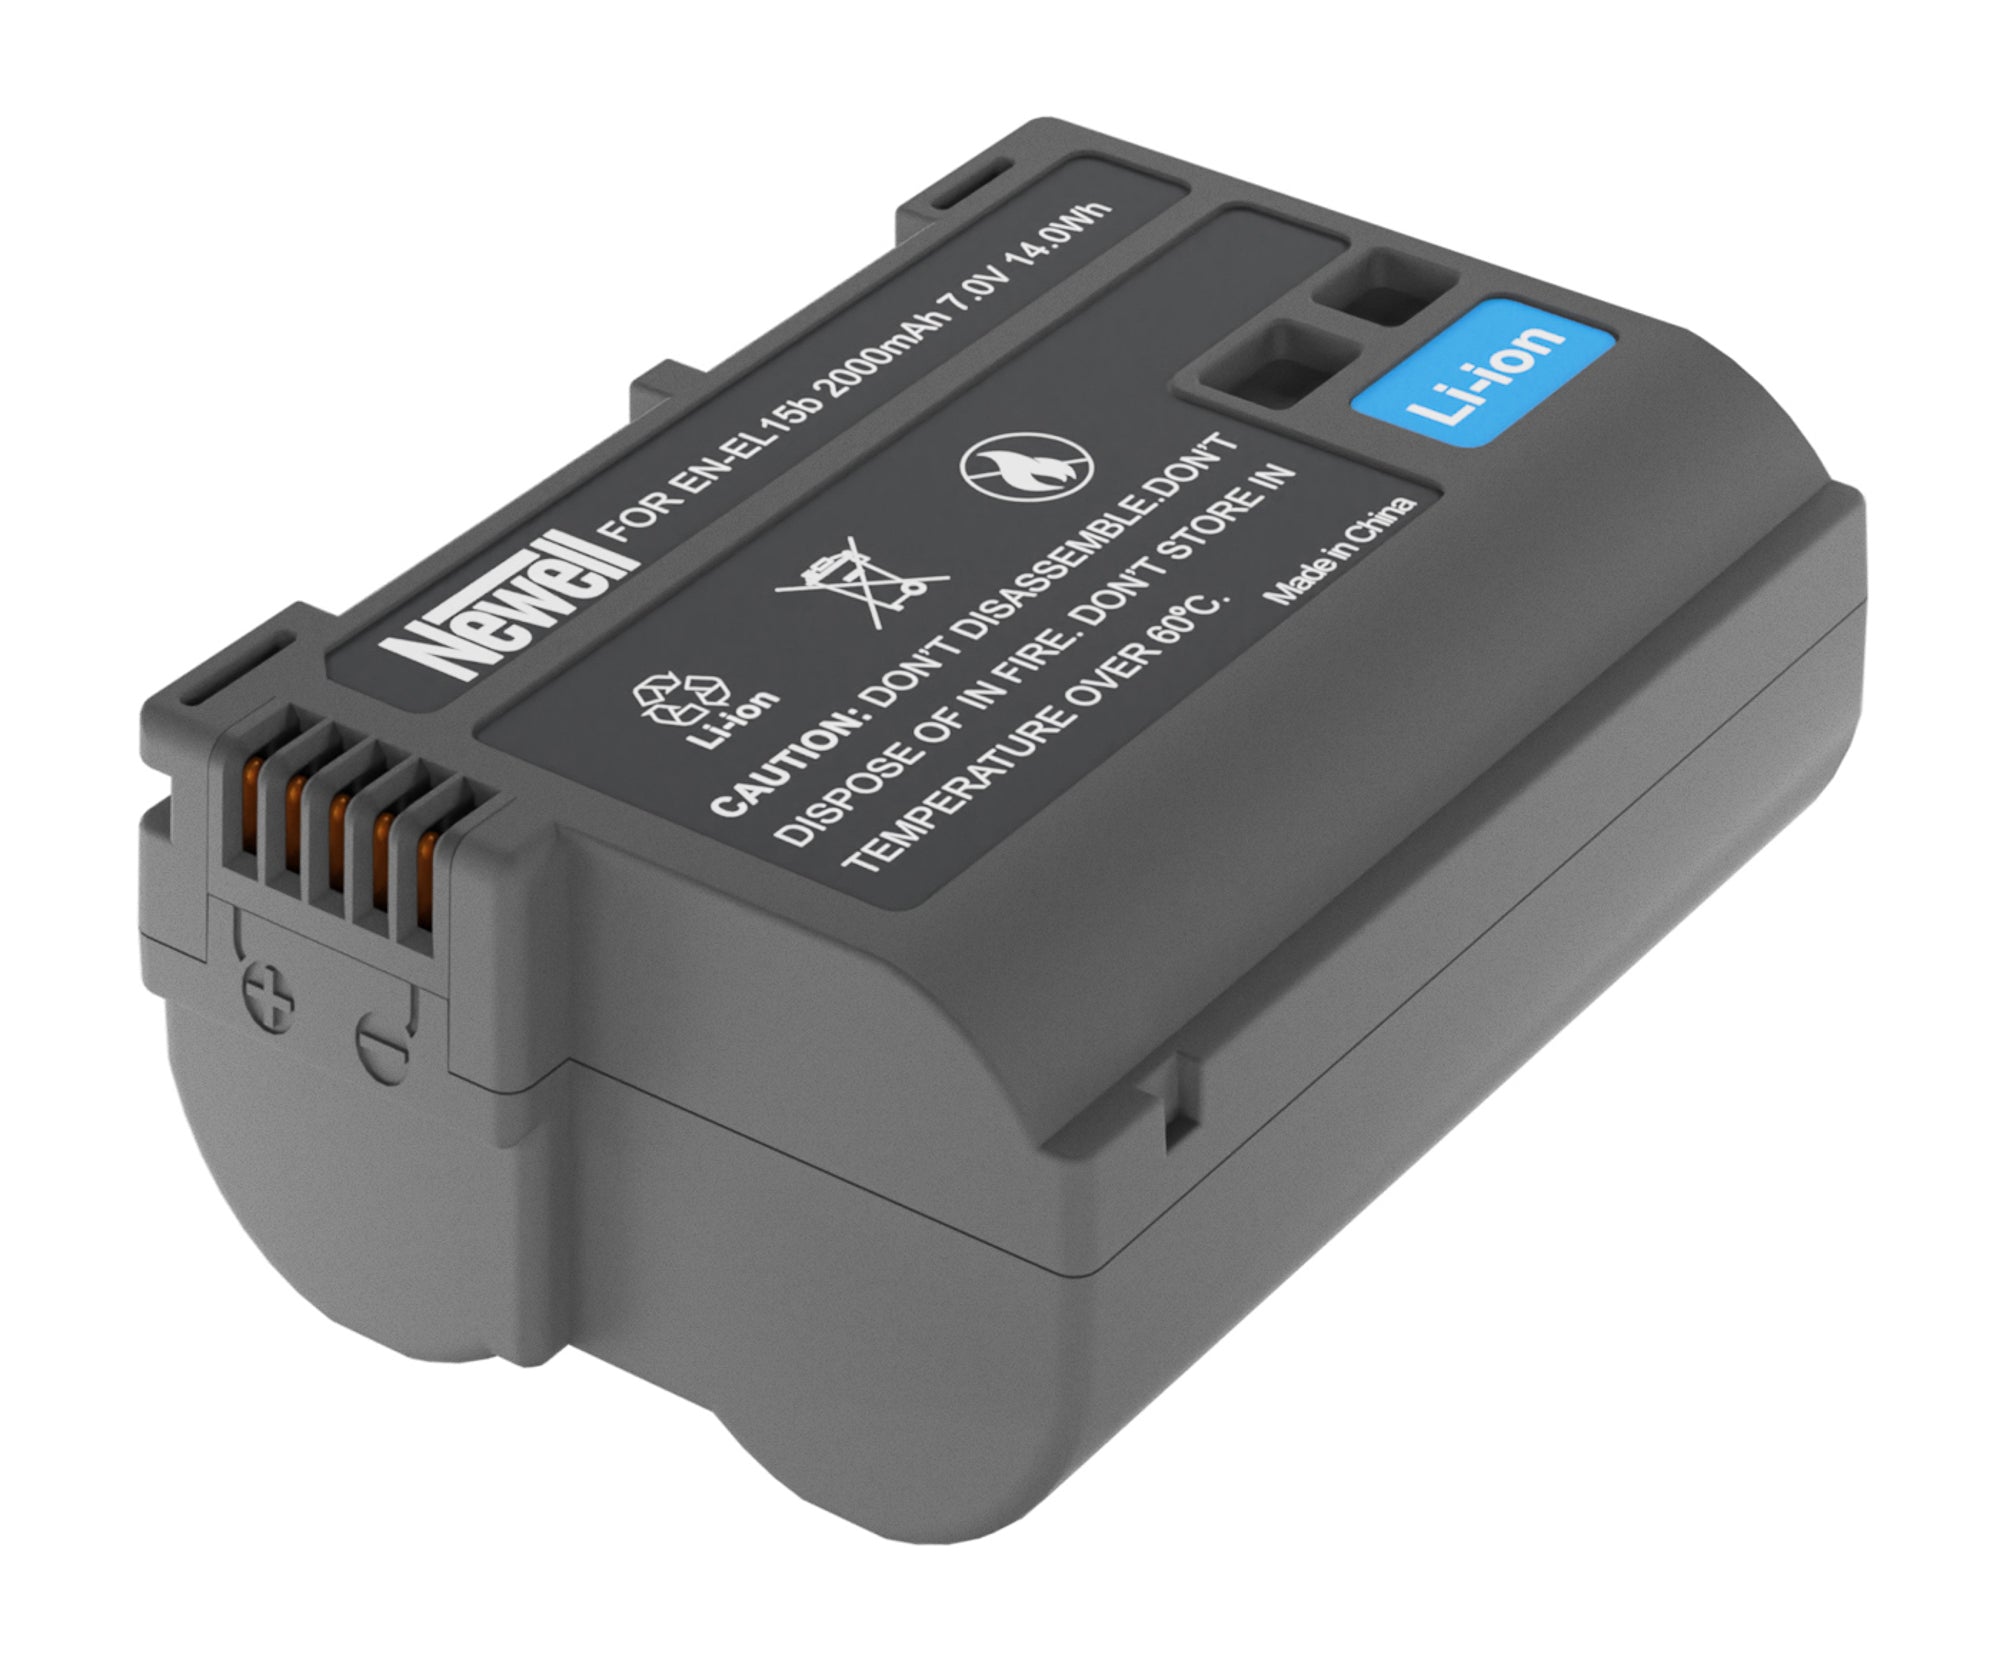 Newell DL-USB-C charger and 1x EN-EL15b battery for Nikon